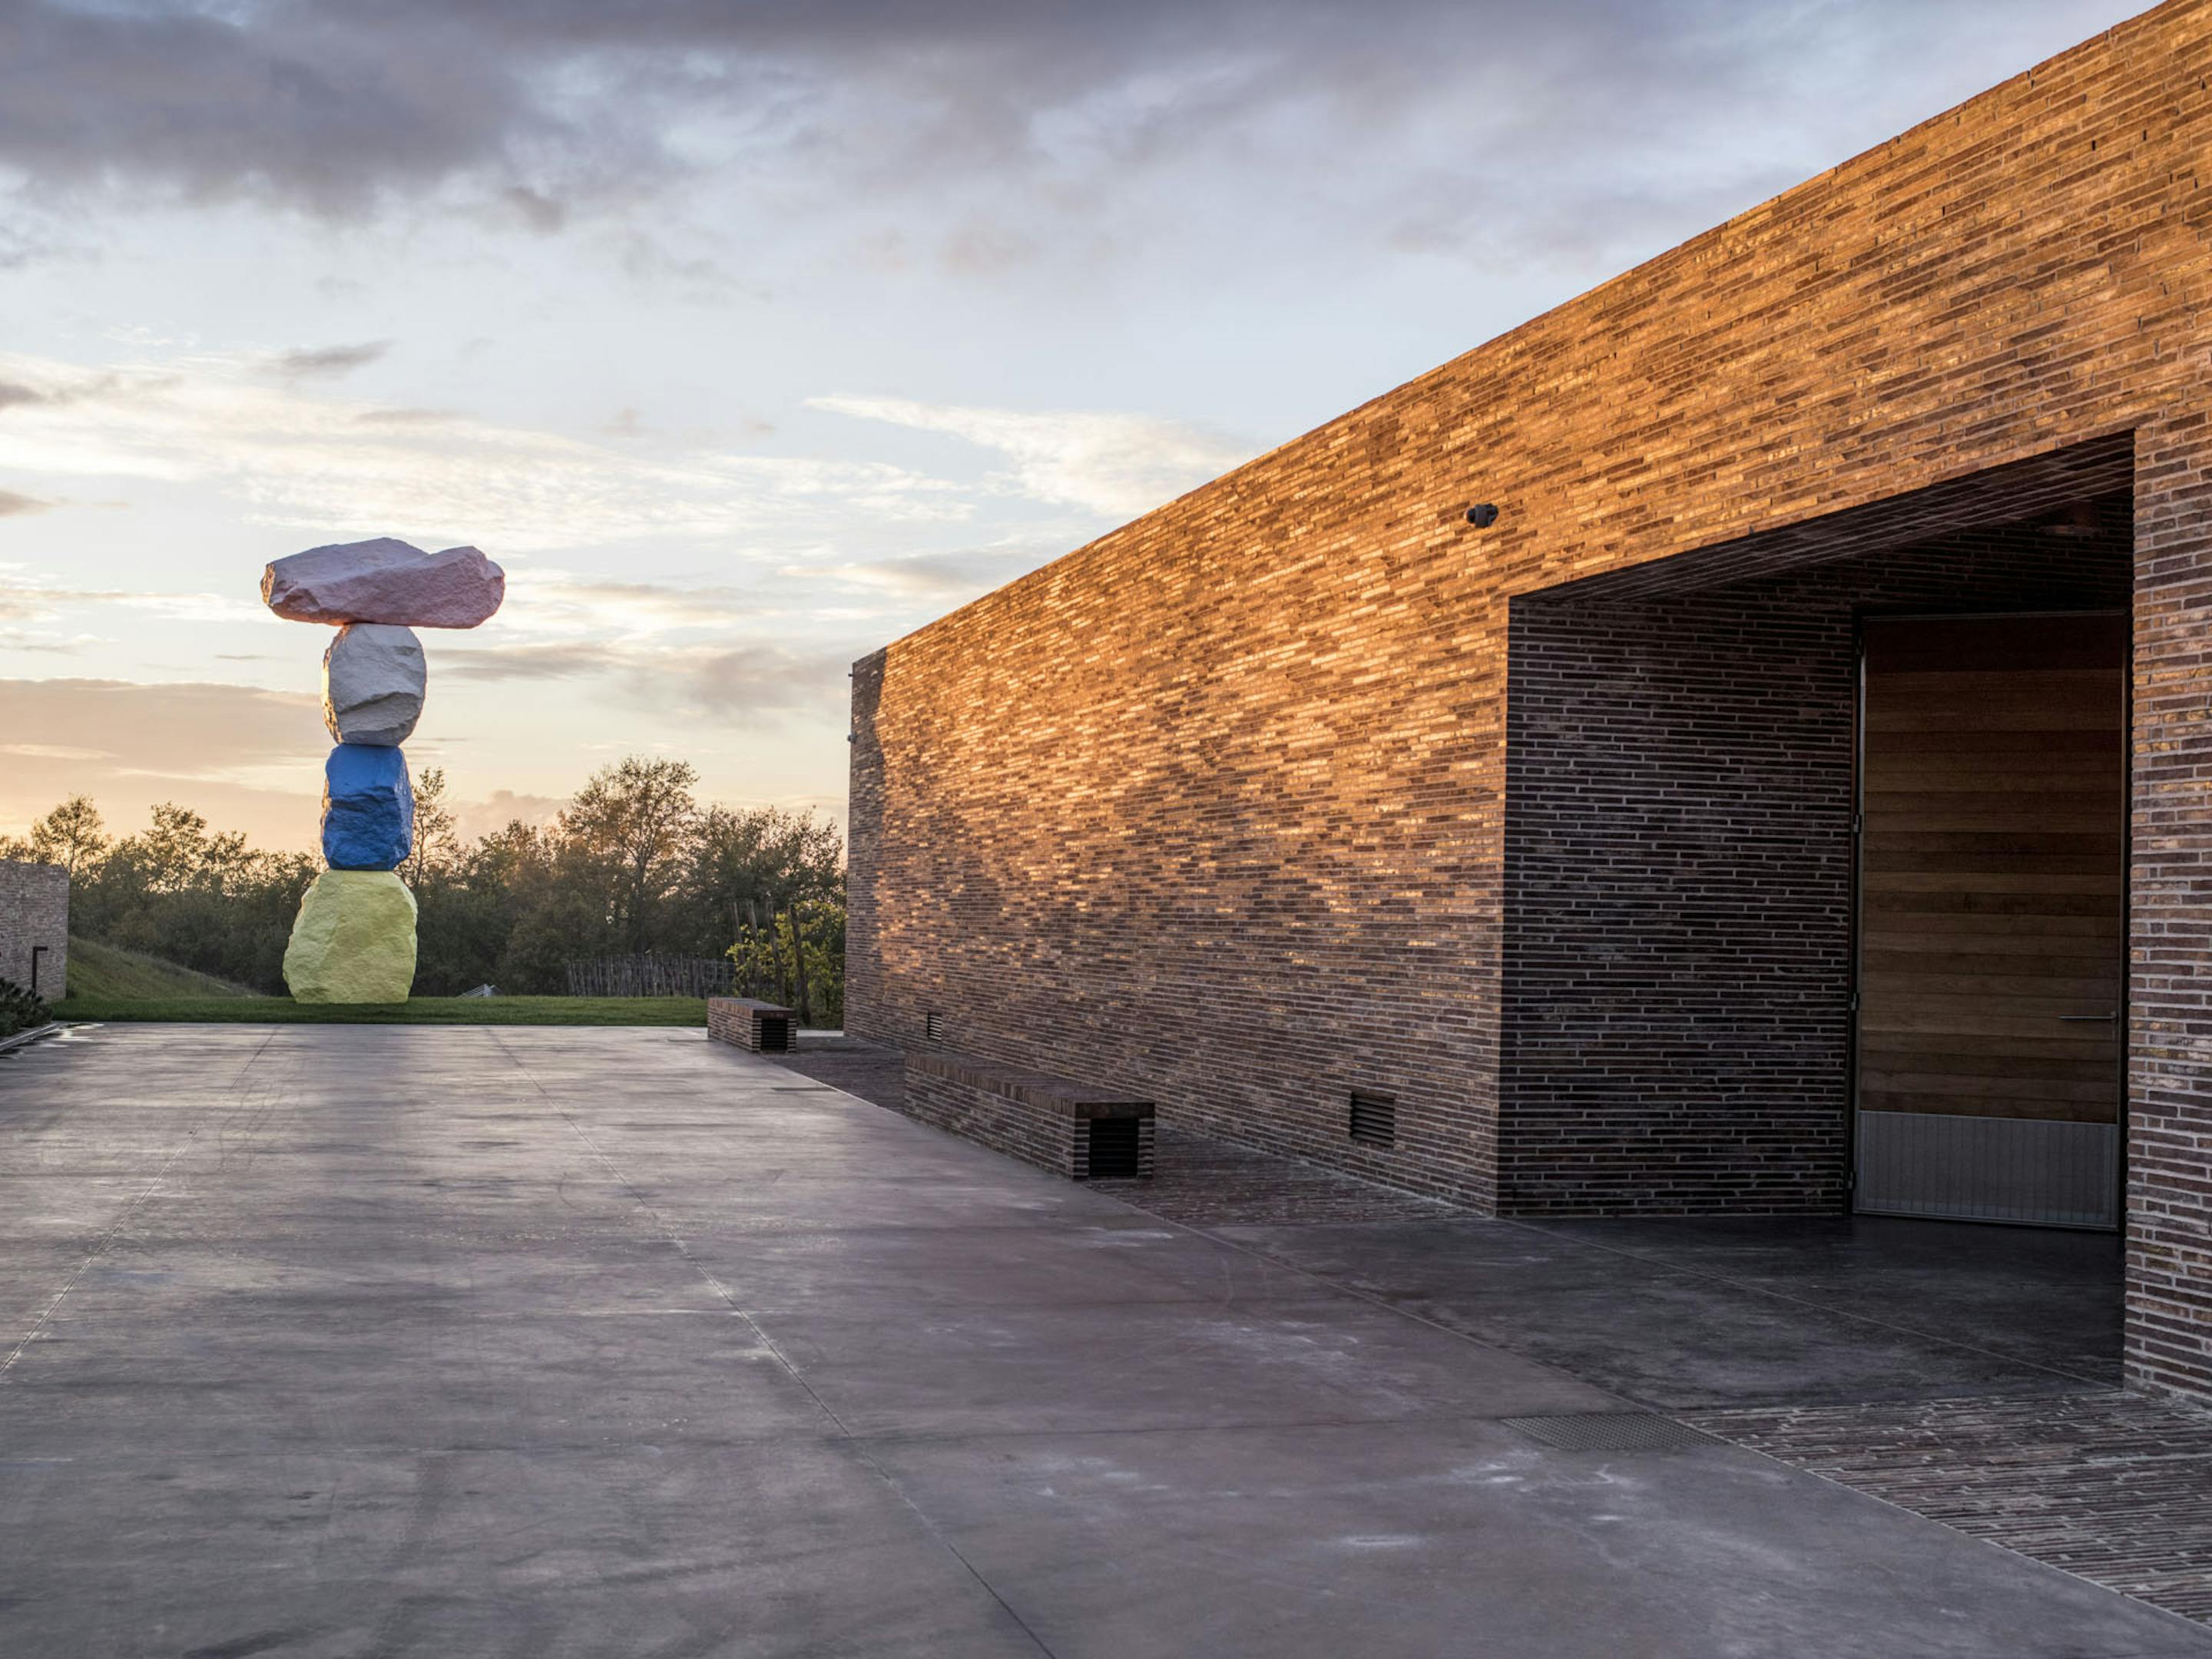 Fabbrica winery at sunset with the sculpture by Ugo Rondinone